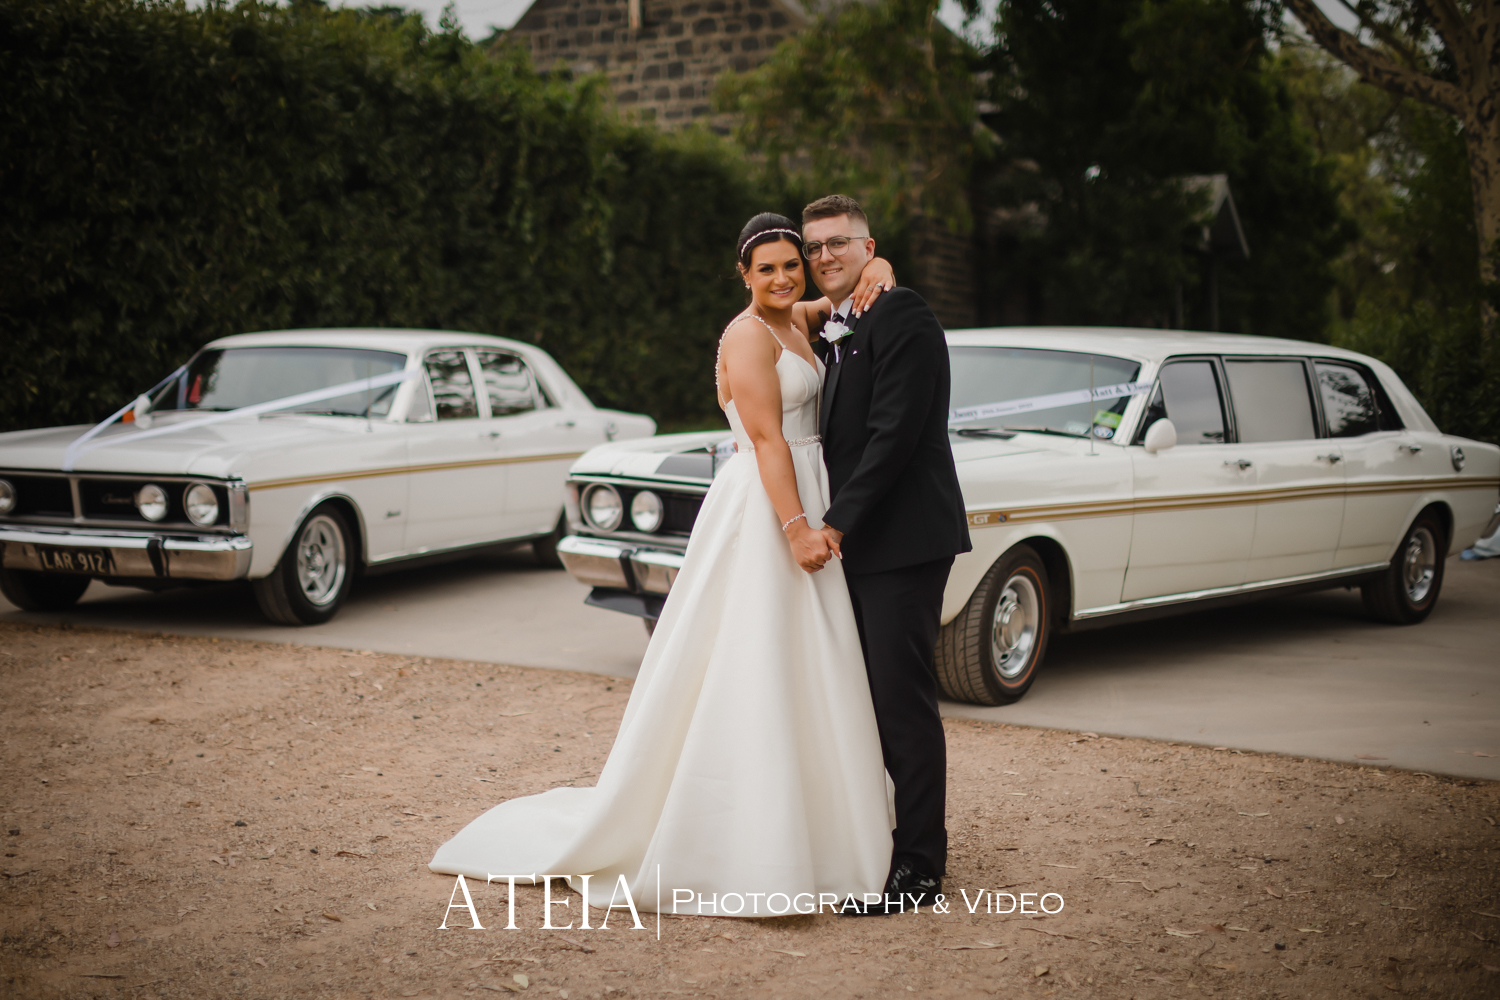 , Ebony and Matthew&#8217;s wedding photography at Meadowbank Estate captured by ATEIA Photography &#038; Video